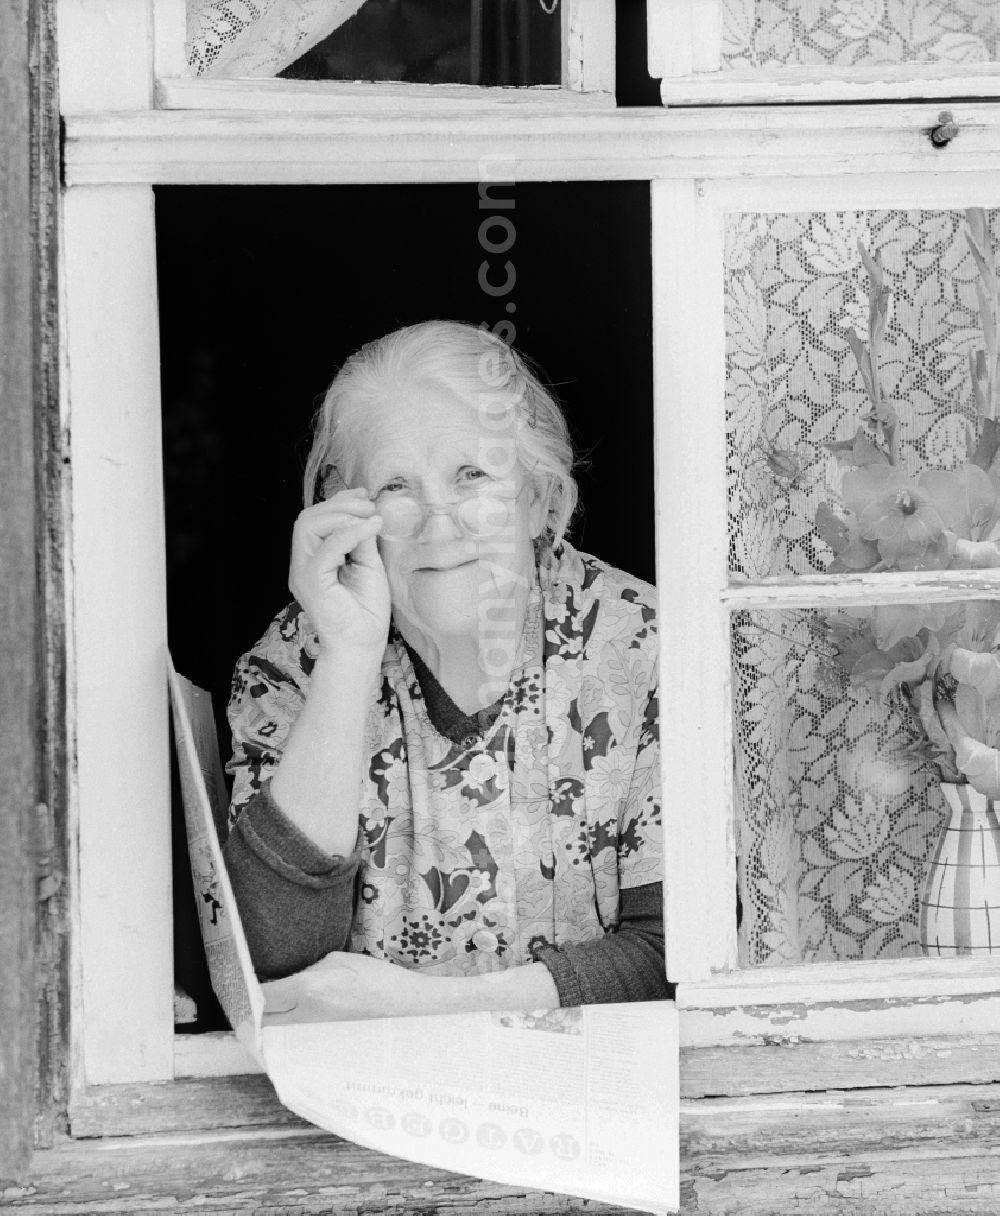 GDR image archive: Quedlinburg - Mature woman with coat apron and glasses looks out of a window in Quedlinburg in the state of Saxony-Anhalt on the territory of the former GDR, German Democratic Republic